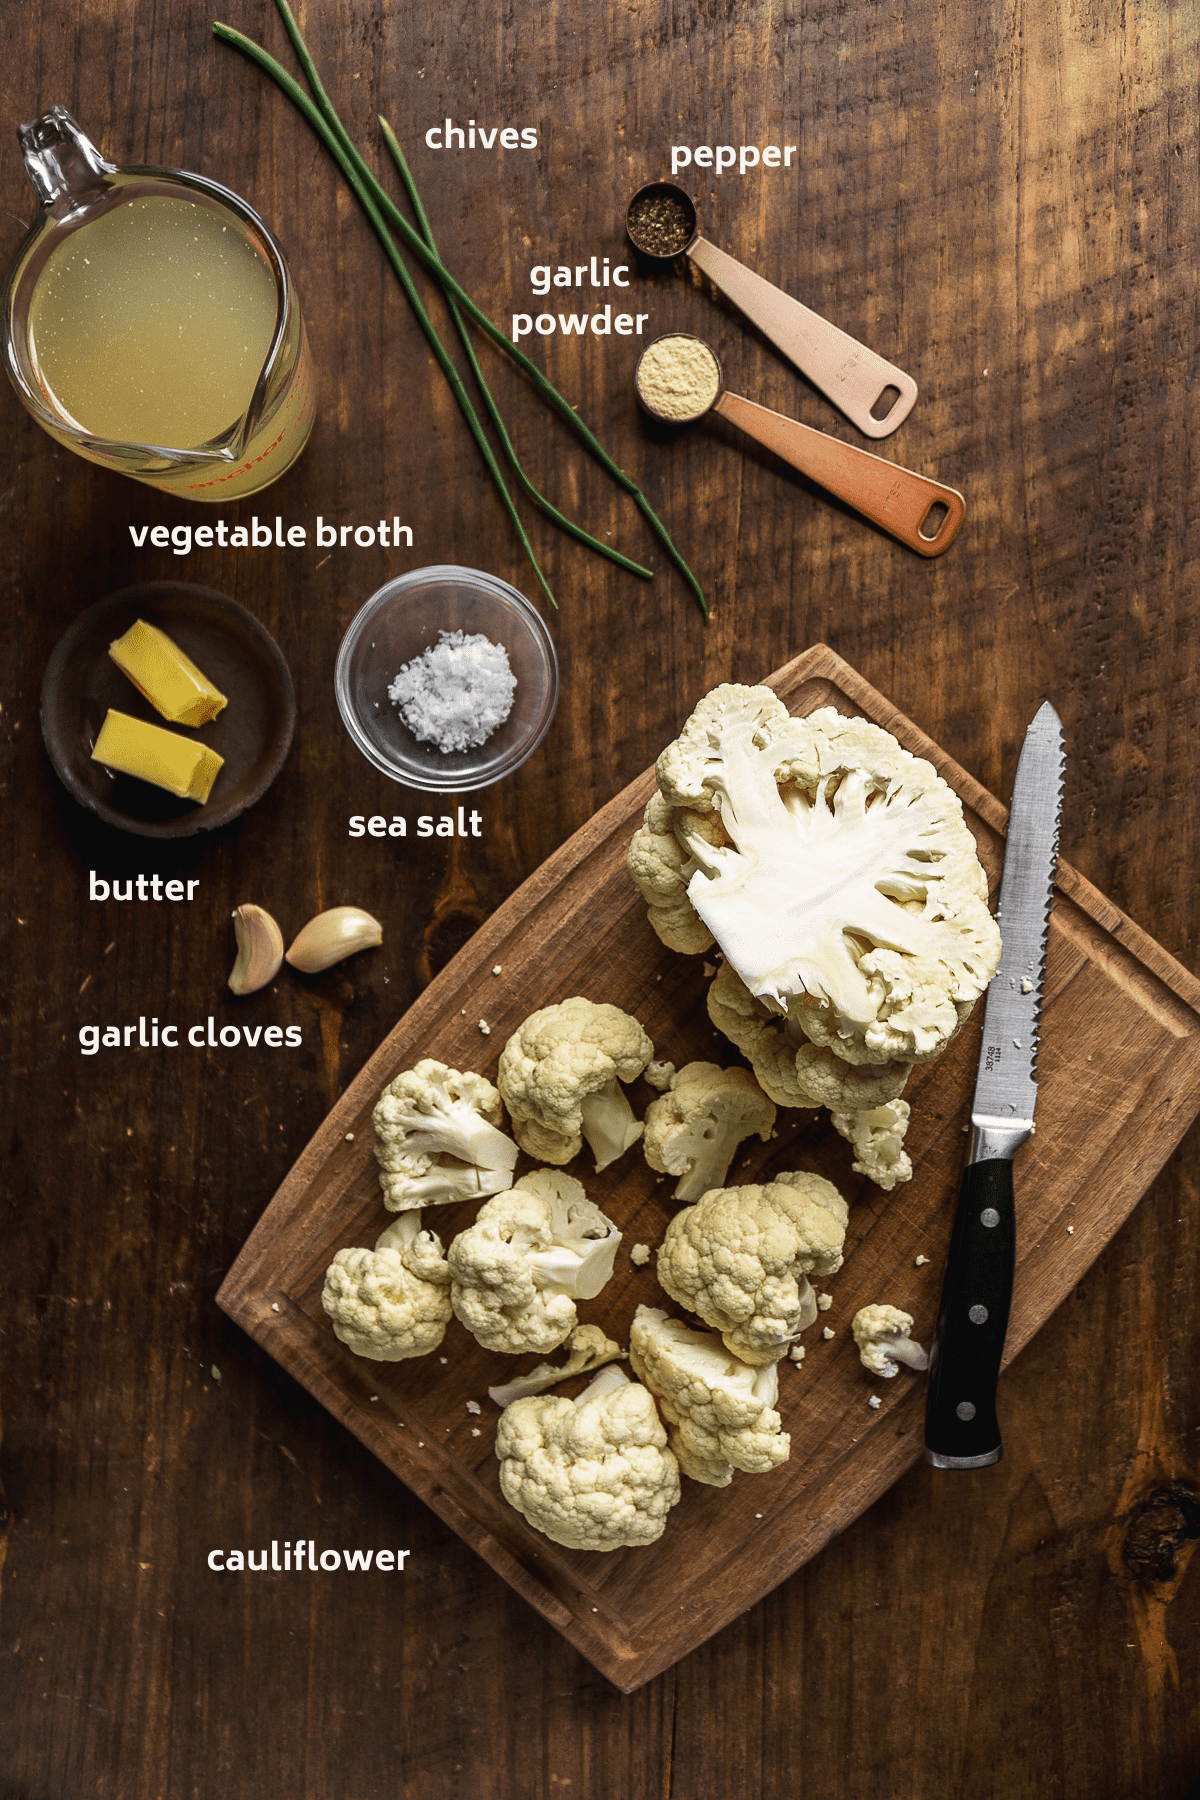 Cauliflower mash ingredients on a wooden surface with labels in white.